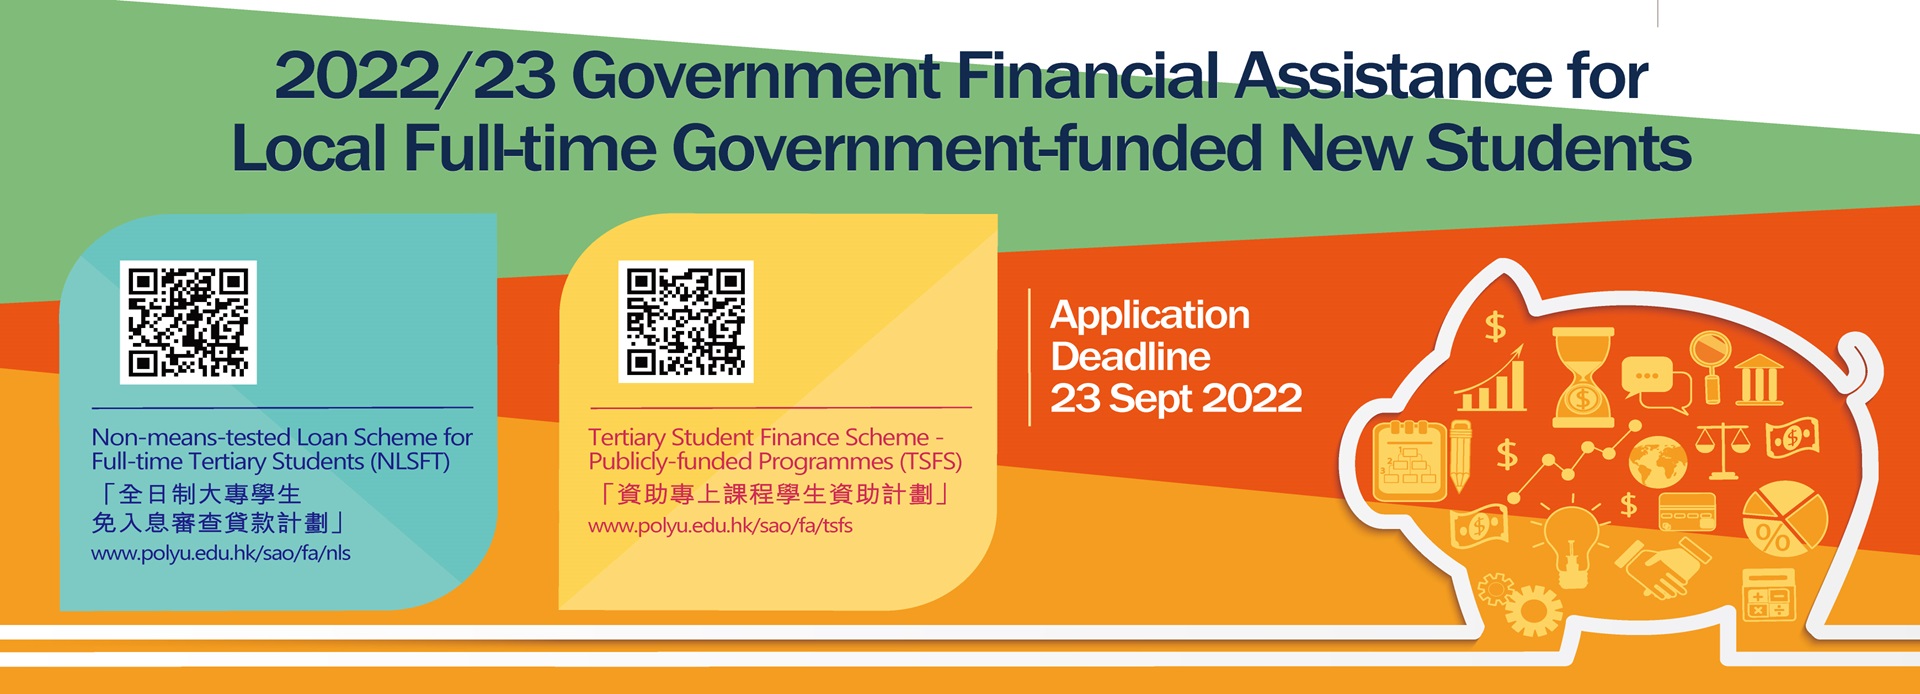 Government Financial Assistance